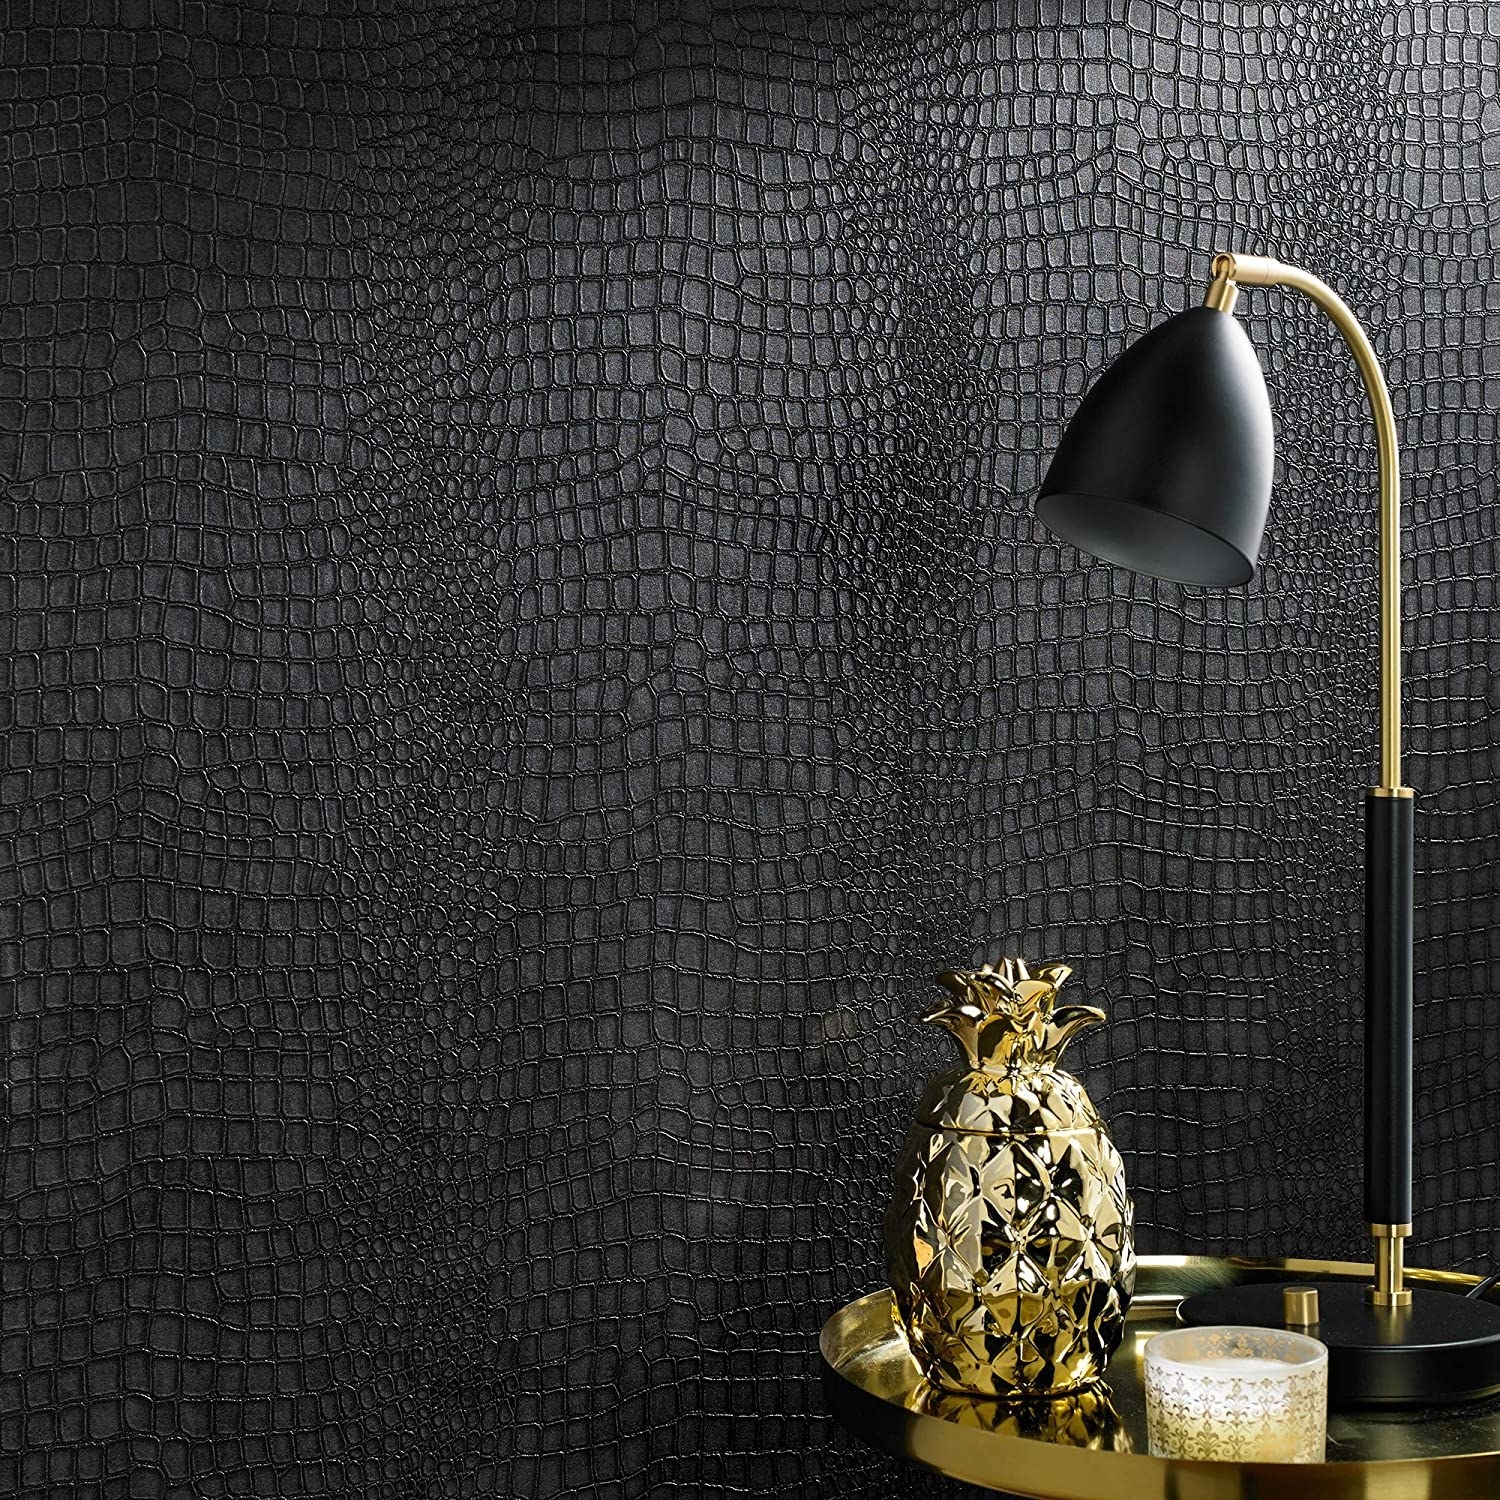 A wall with crocodile wallpaper